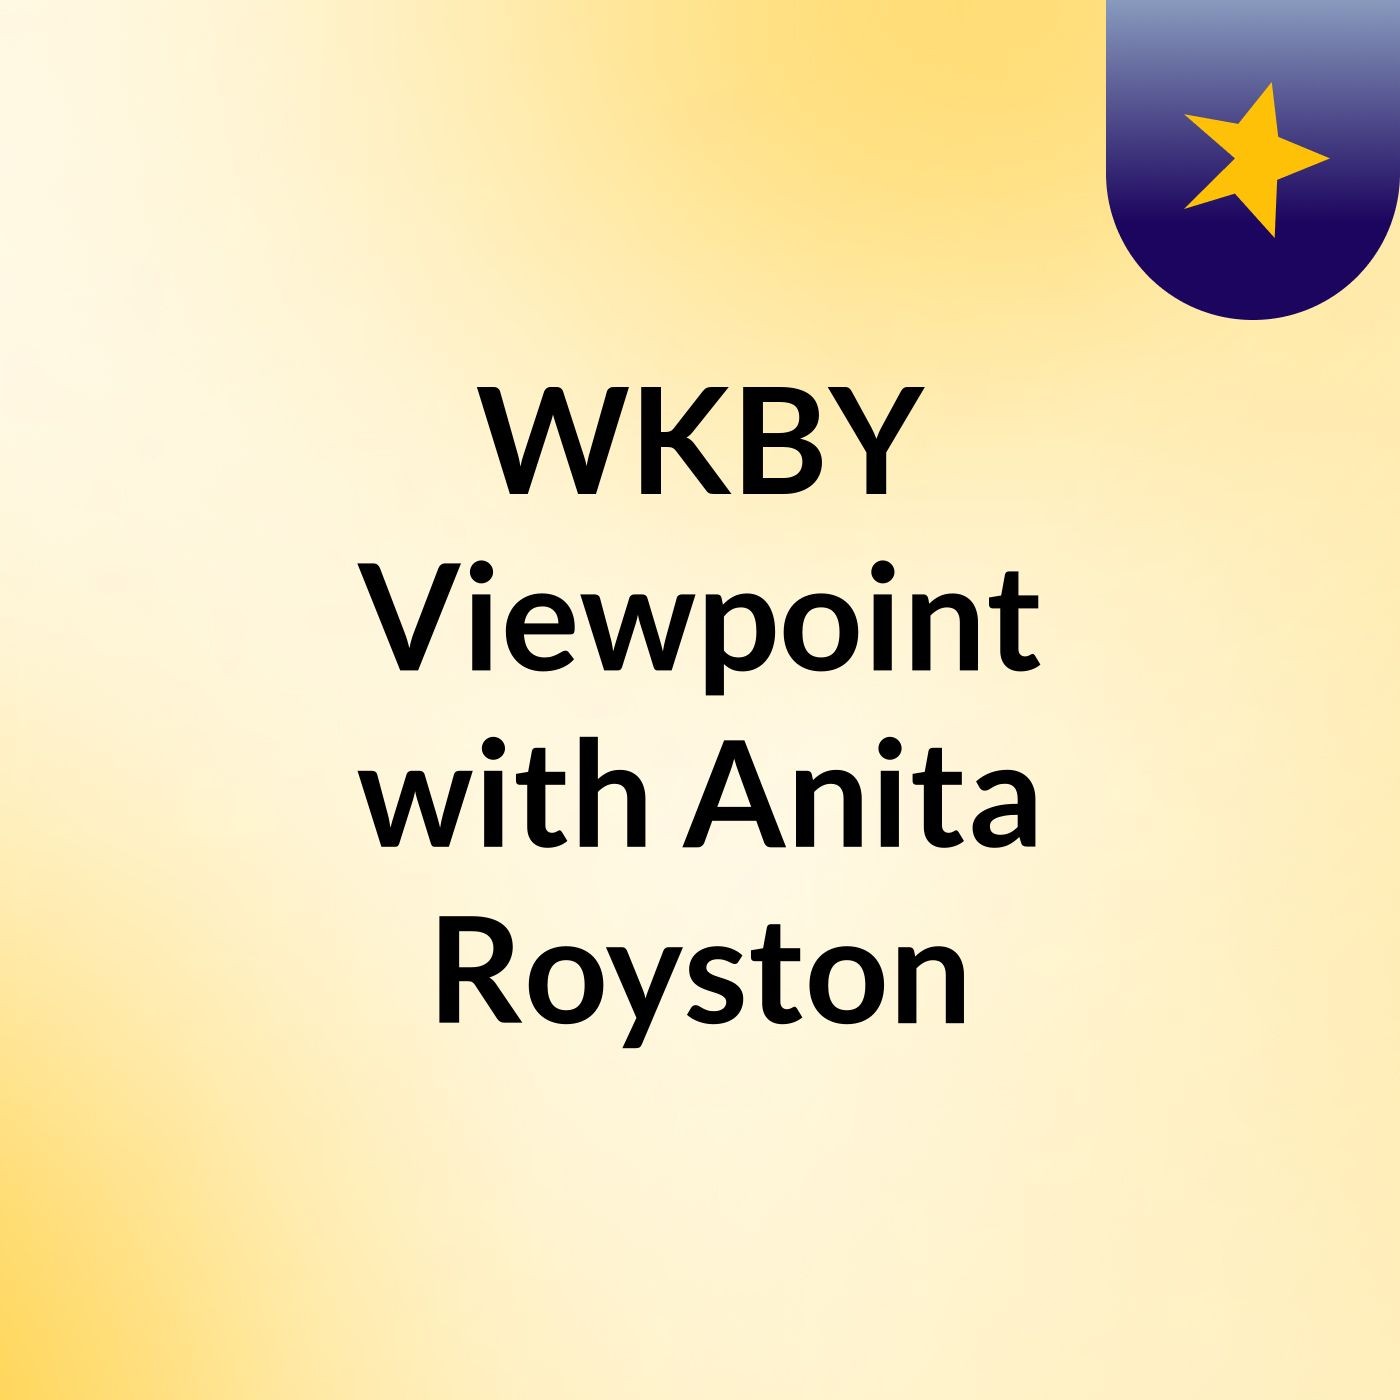 WKBY Viewpoint with Anita Royston